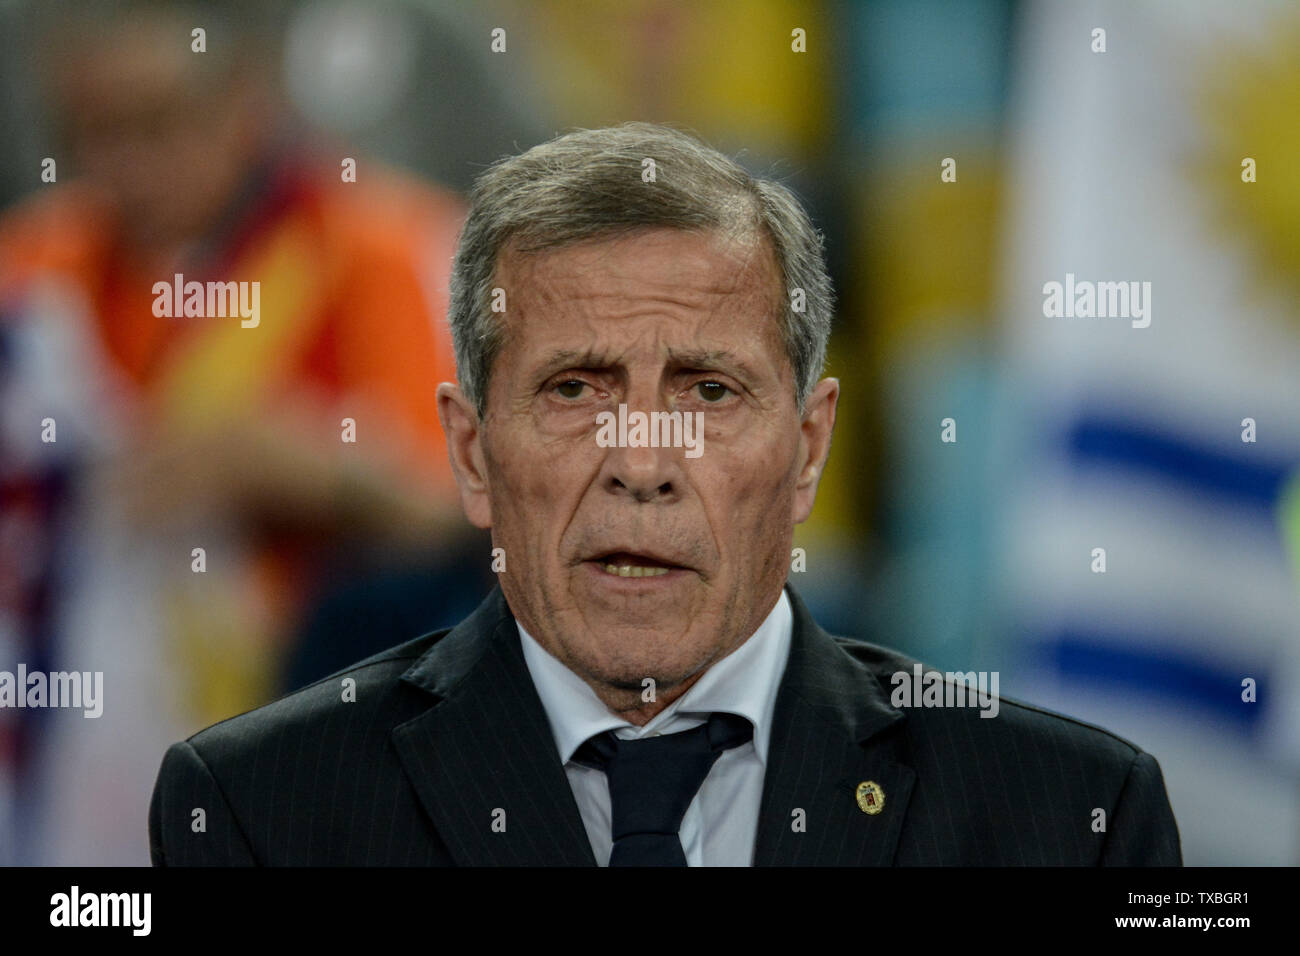 Rio De Janeiro, Brazil. 24th June, 2019. Coach Oscar Tabarez during a match between Chile and Uruguay, valid for the group stage of the Copa America 2019, held this Monday (24) at the Maracanã Stadium in Rio de Janeiro, RJ. Credit: Nayra Halm/FotoArena/Alamy Live News Stock Photo